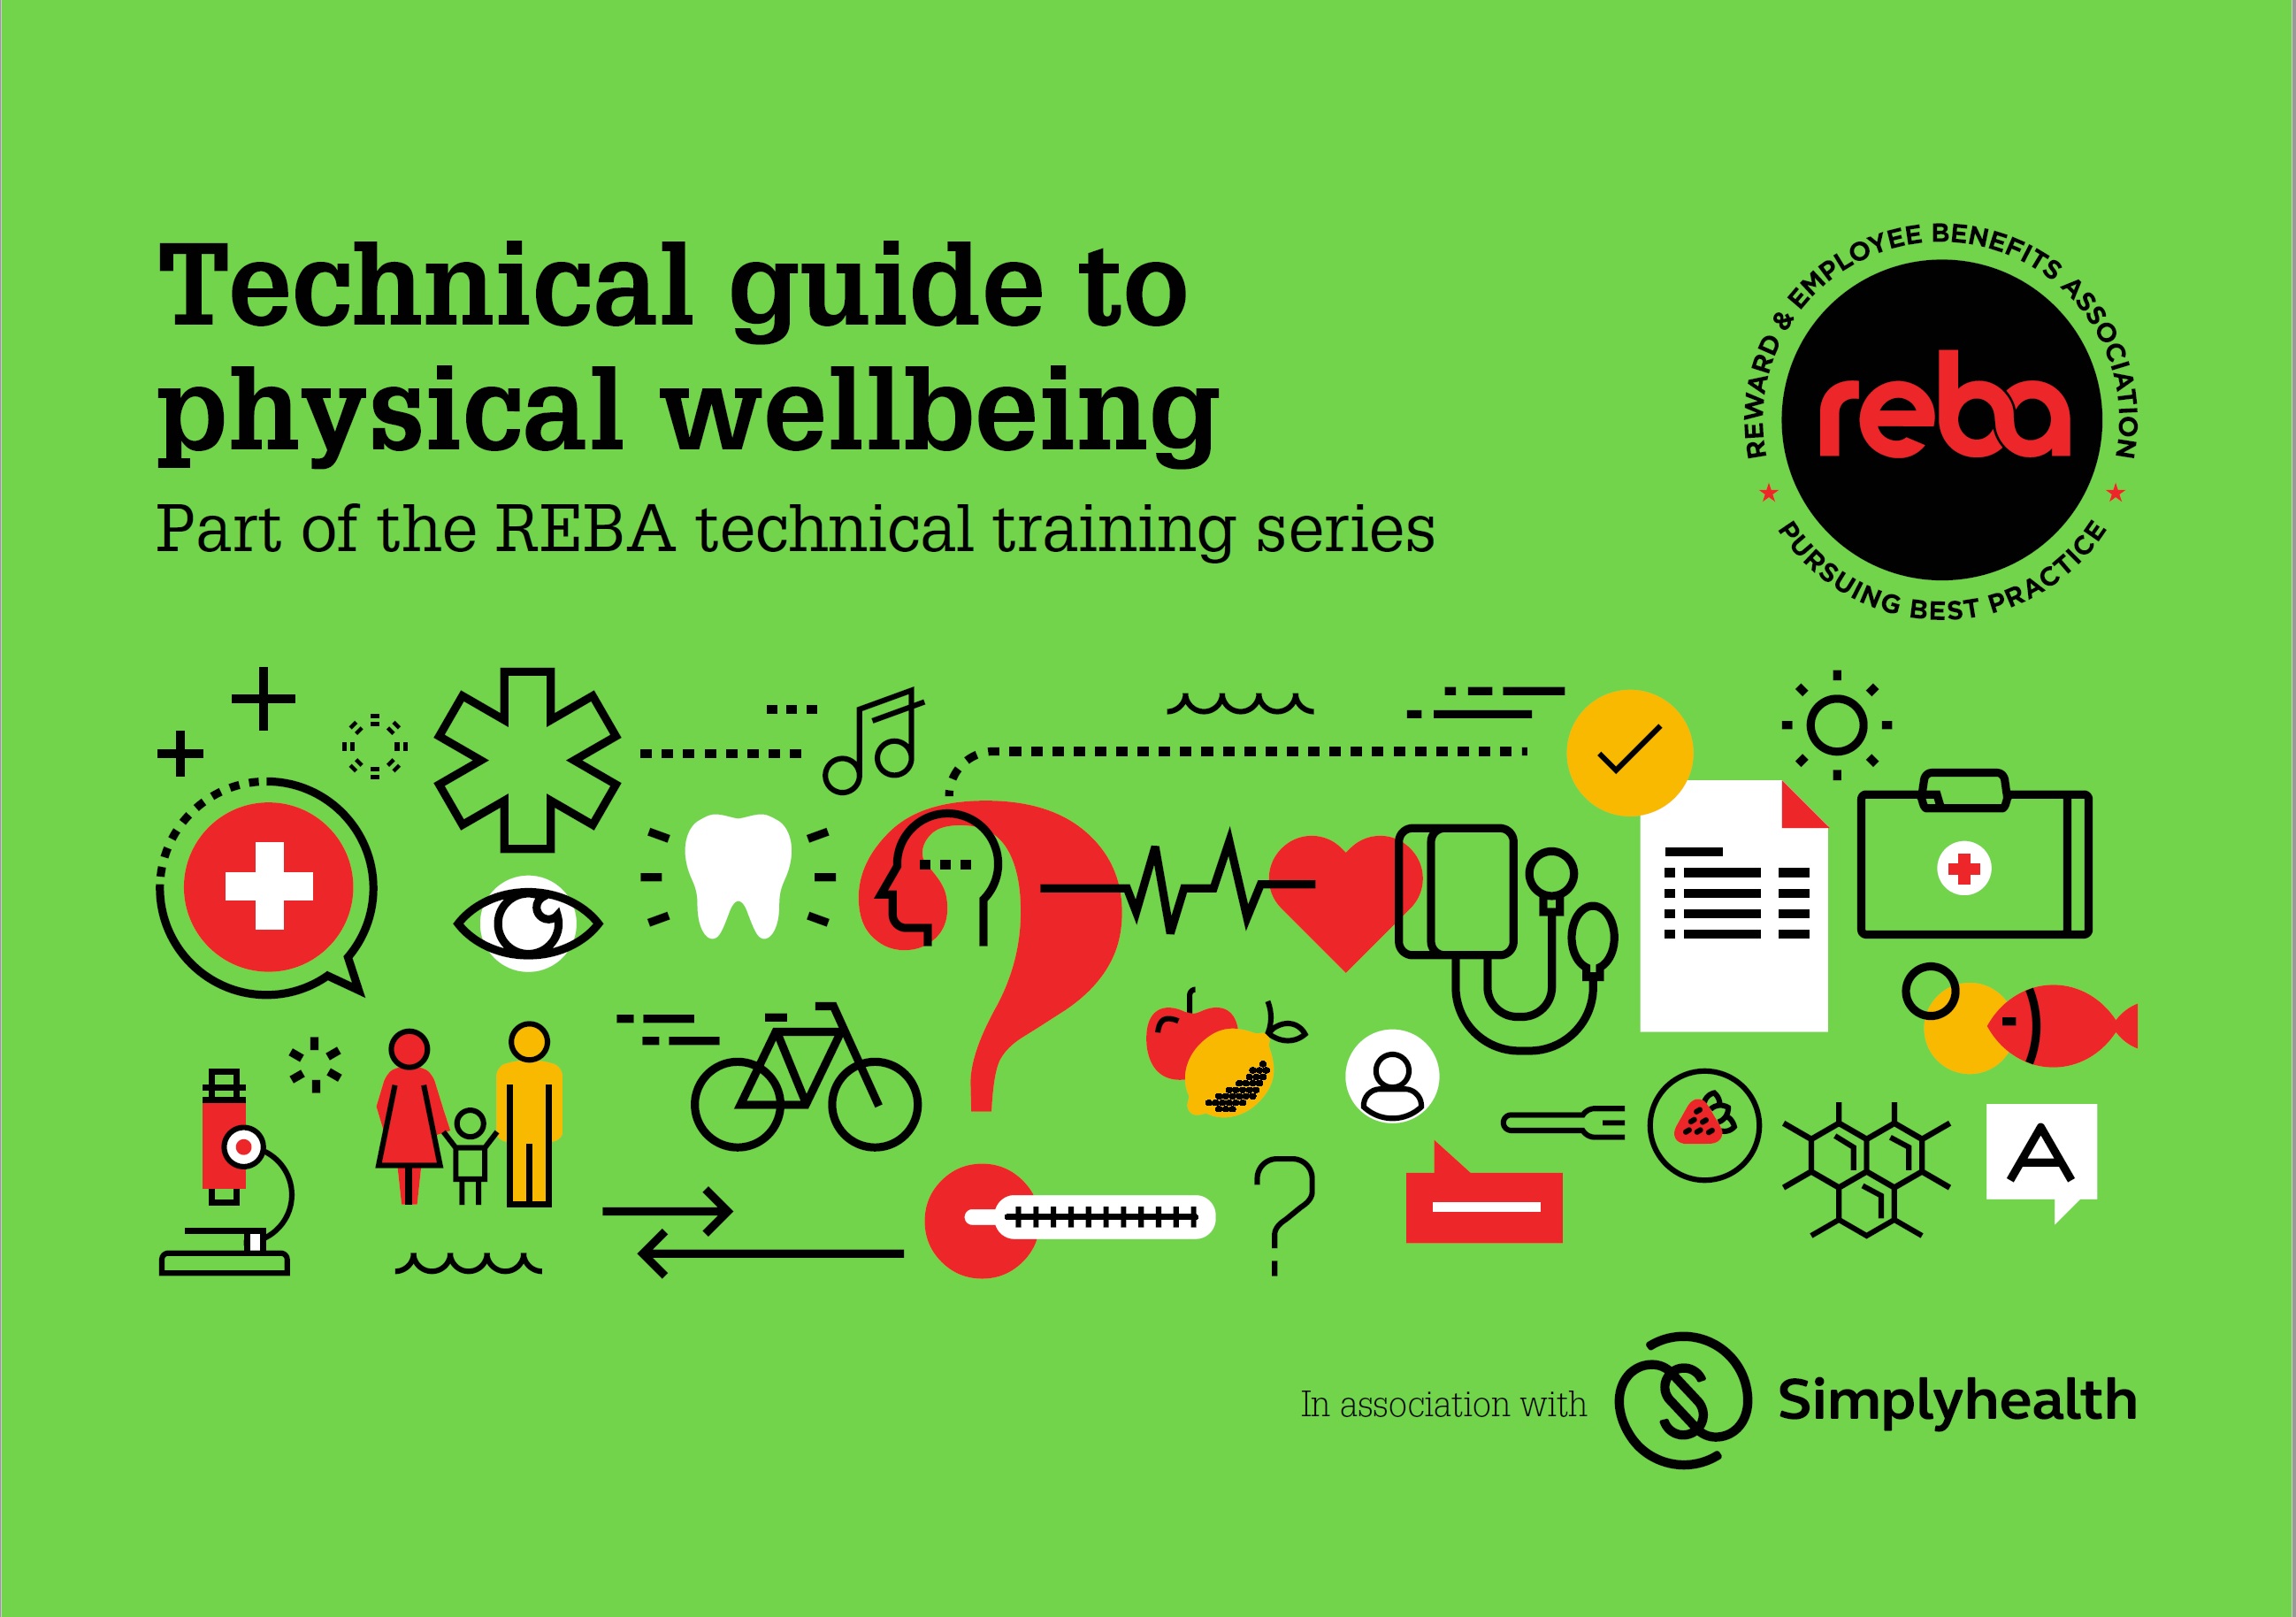 REBA technical training guide to building a physical wellbeing strategy